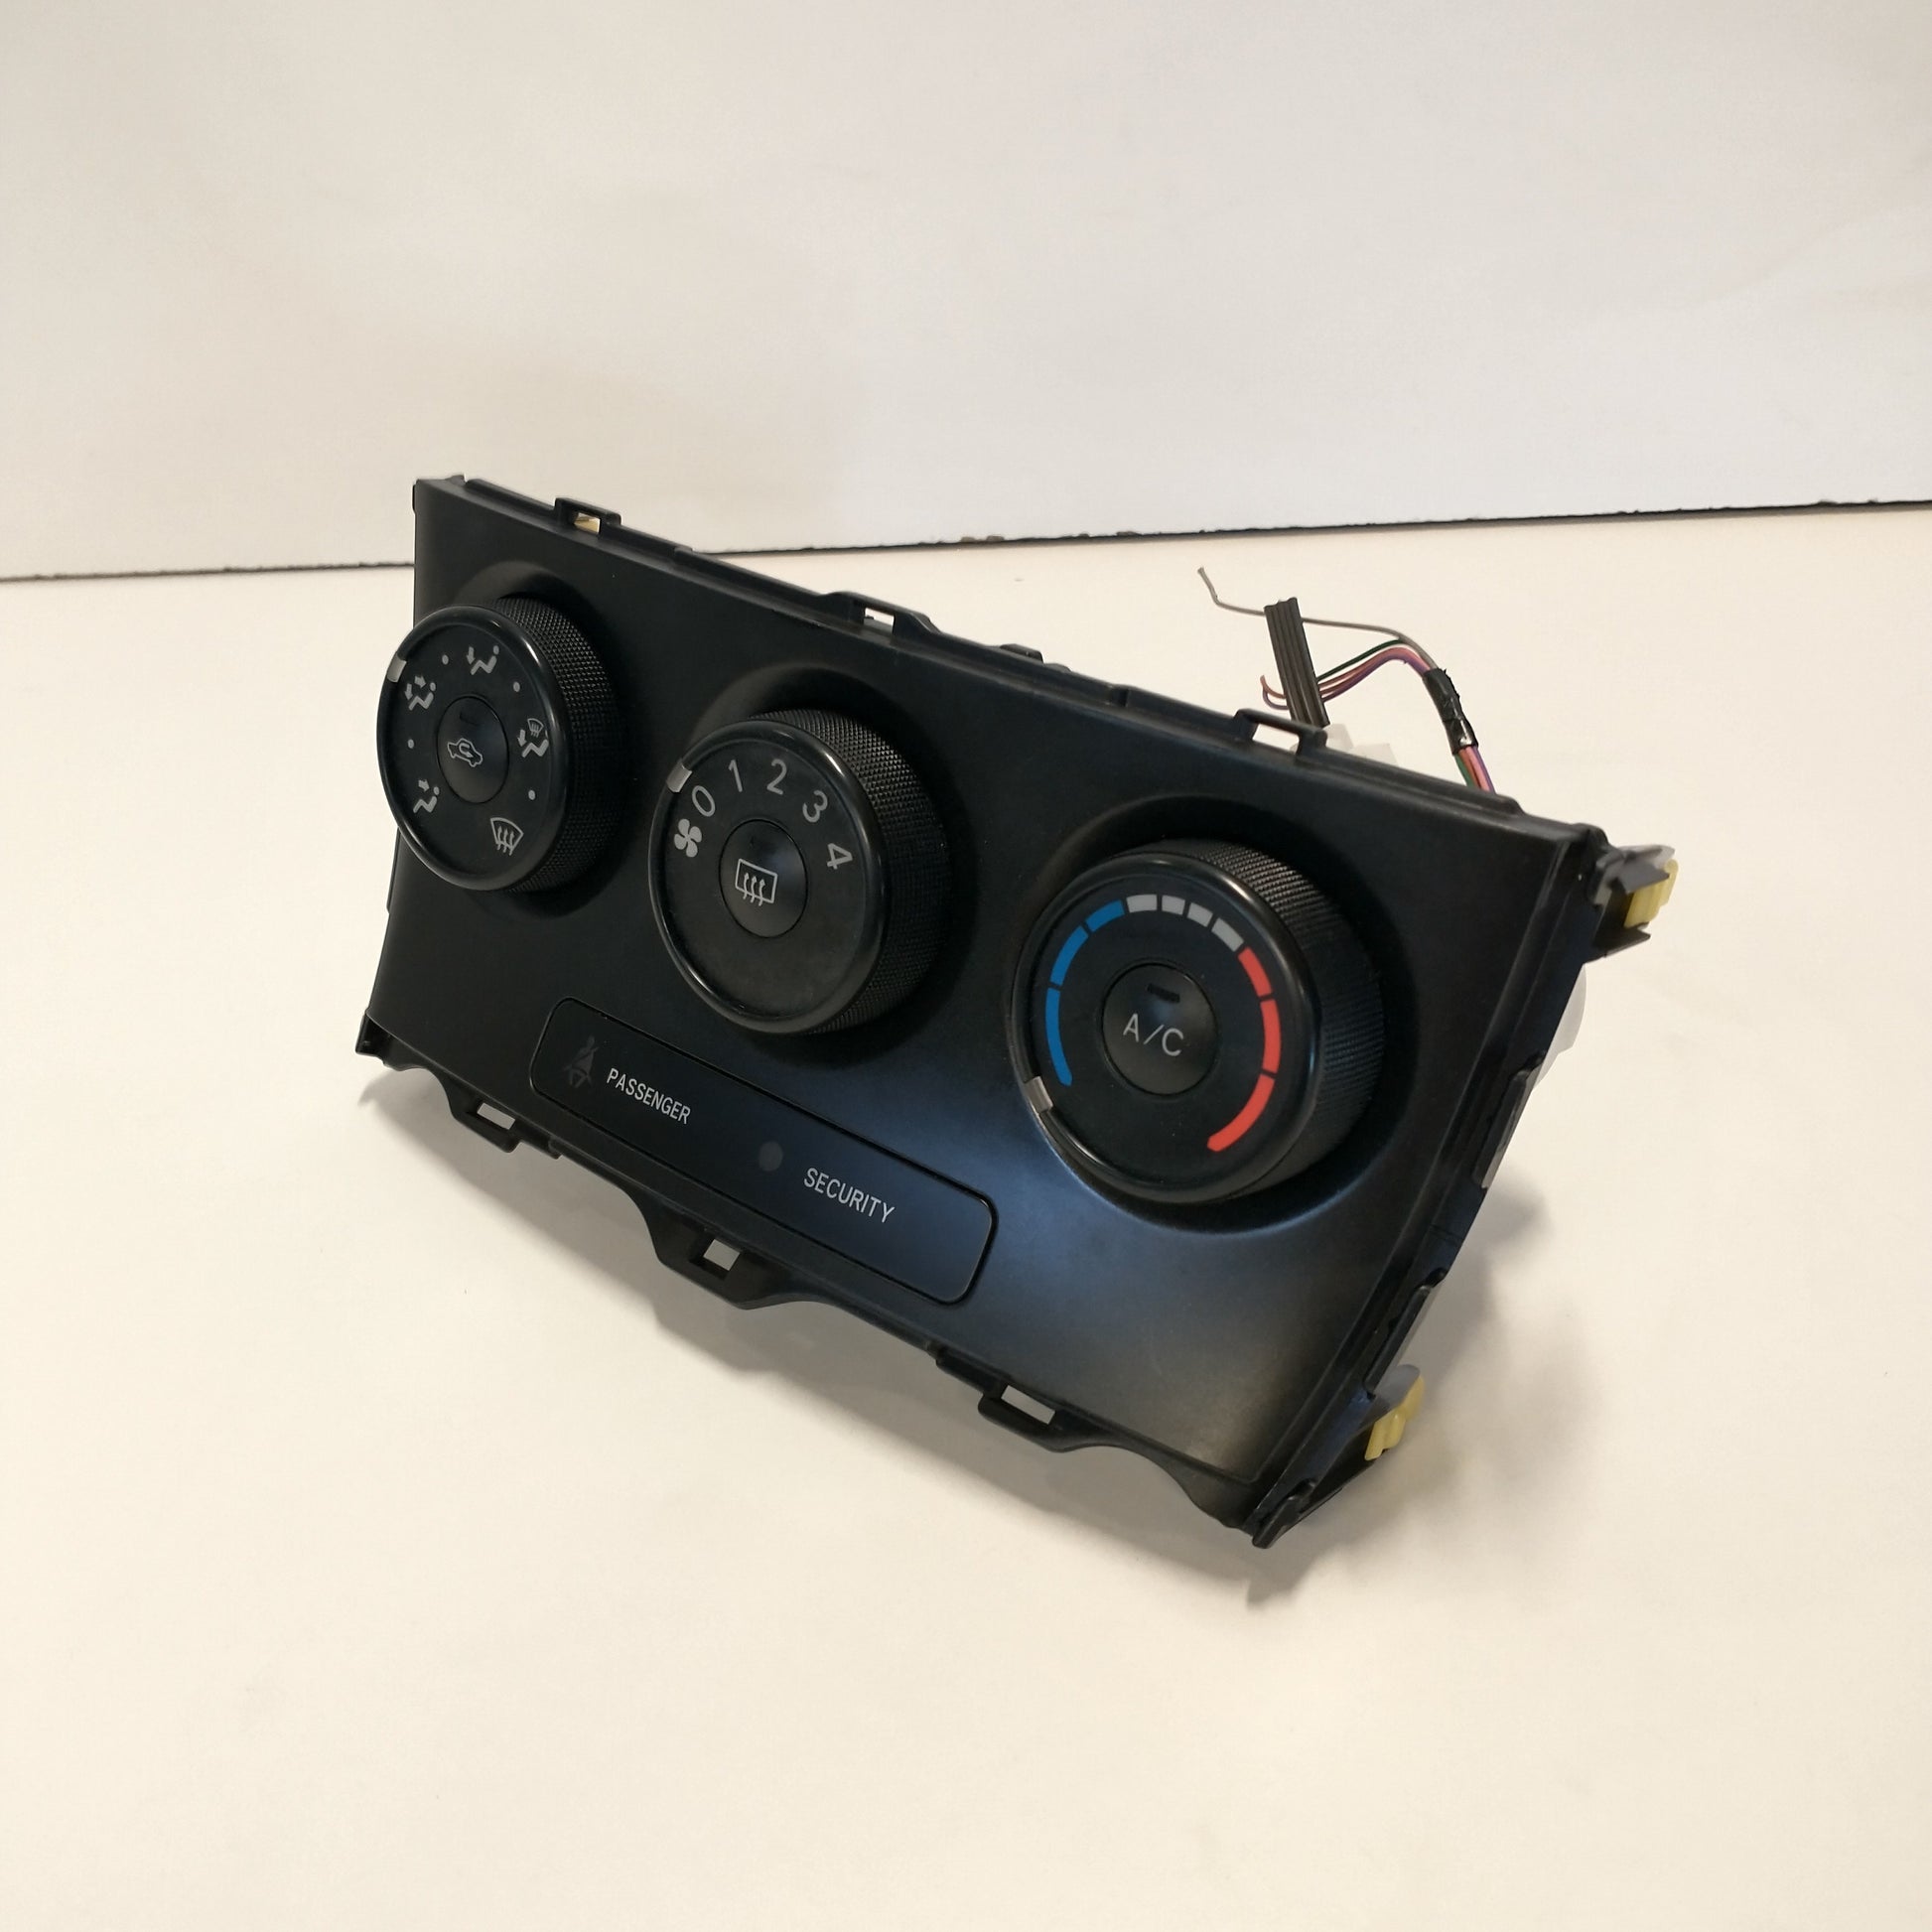 Toyota Corolla Hatchback Heater/Air Conditioning Controls